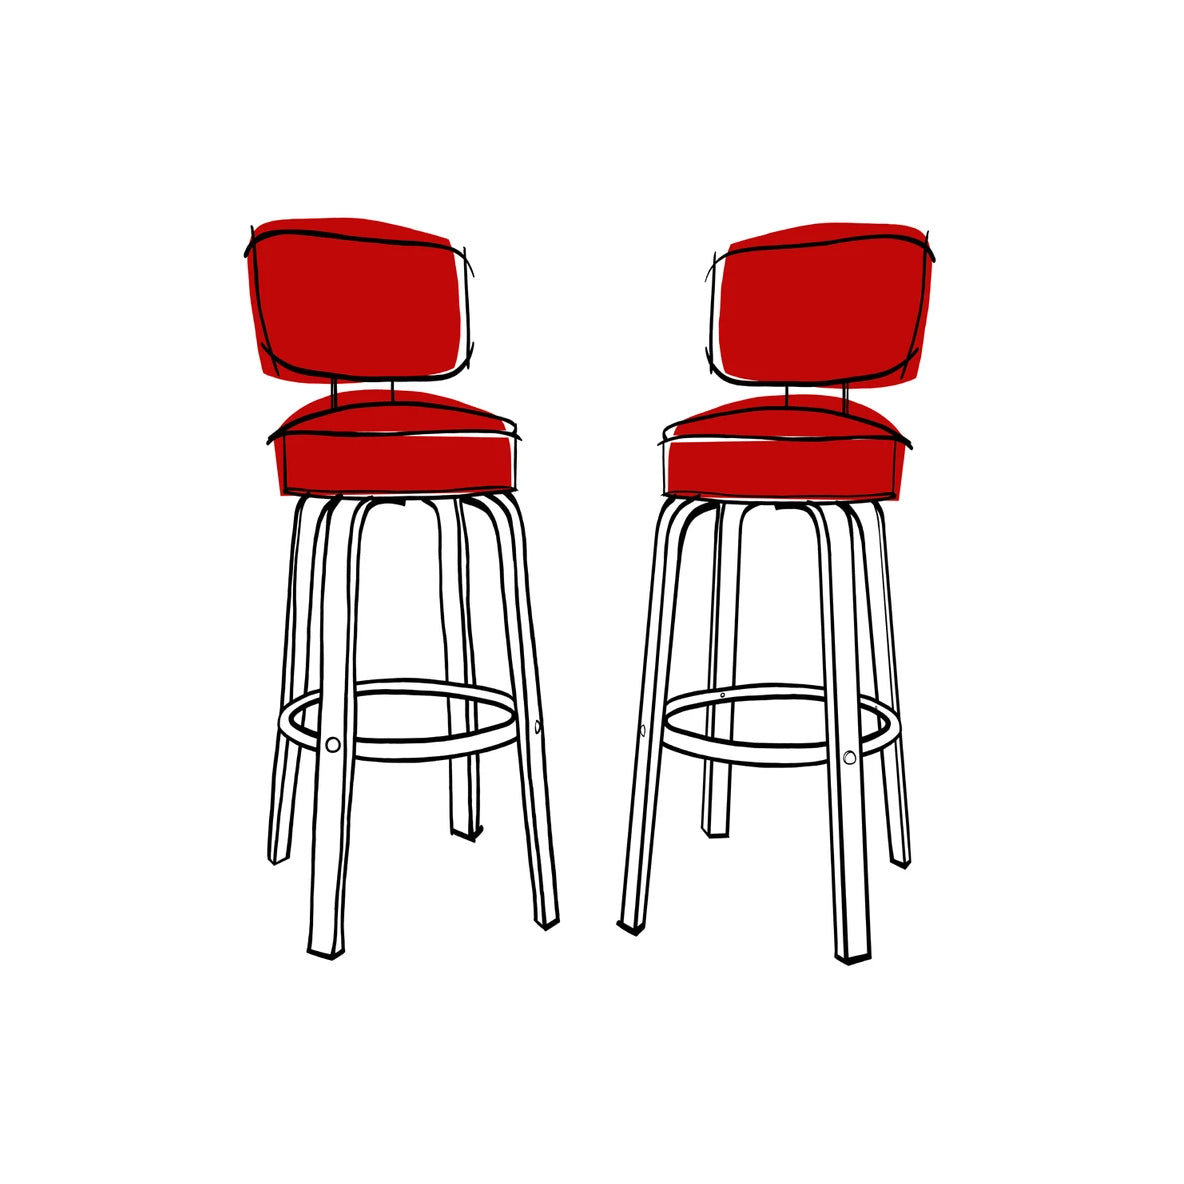 Two Red Stools Poster